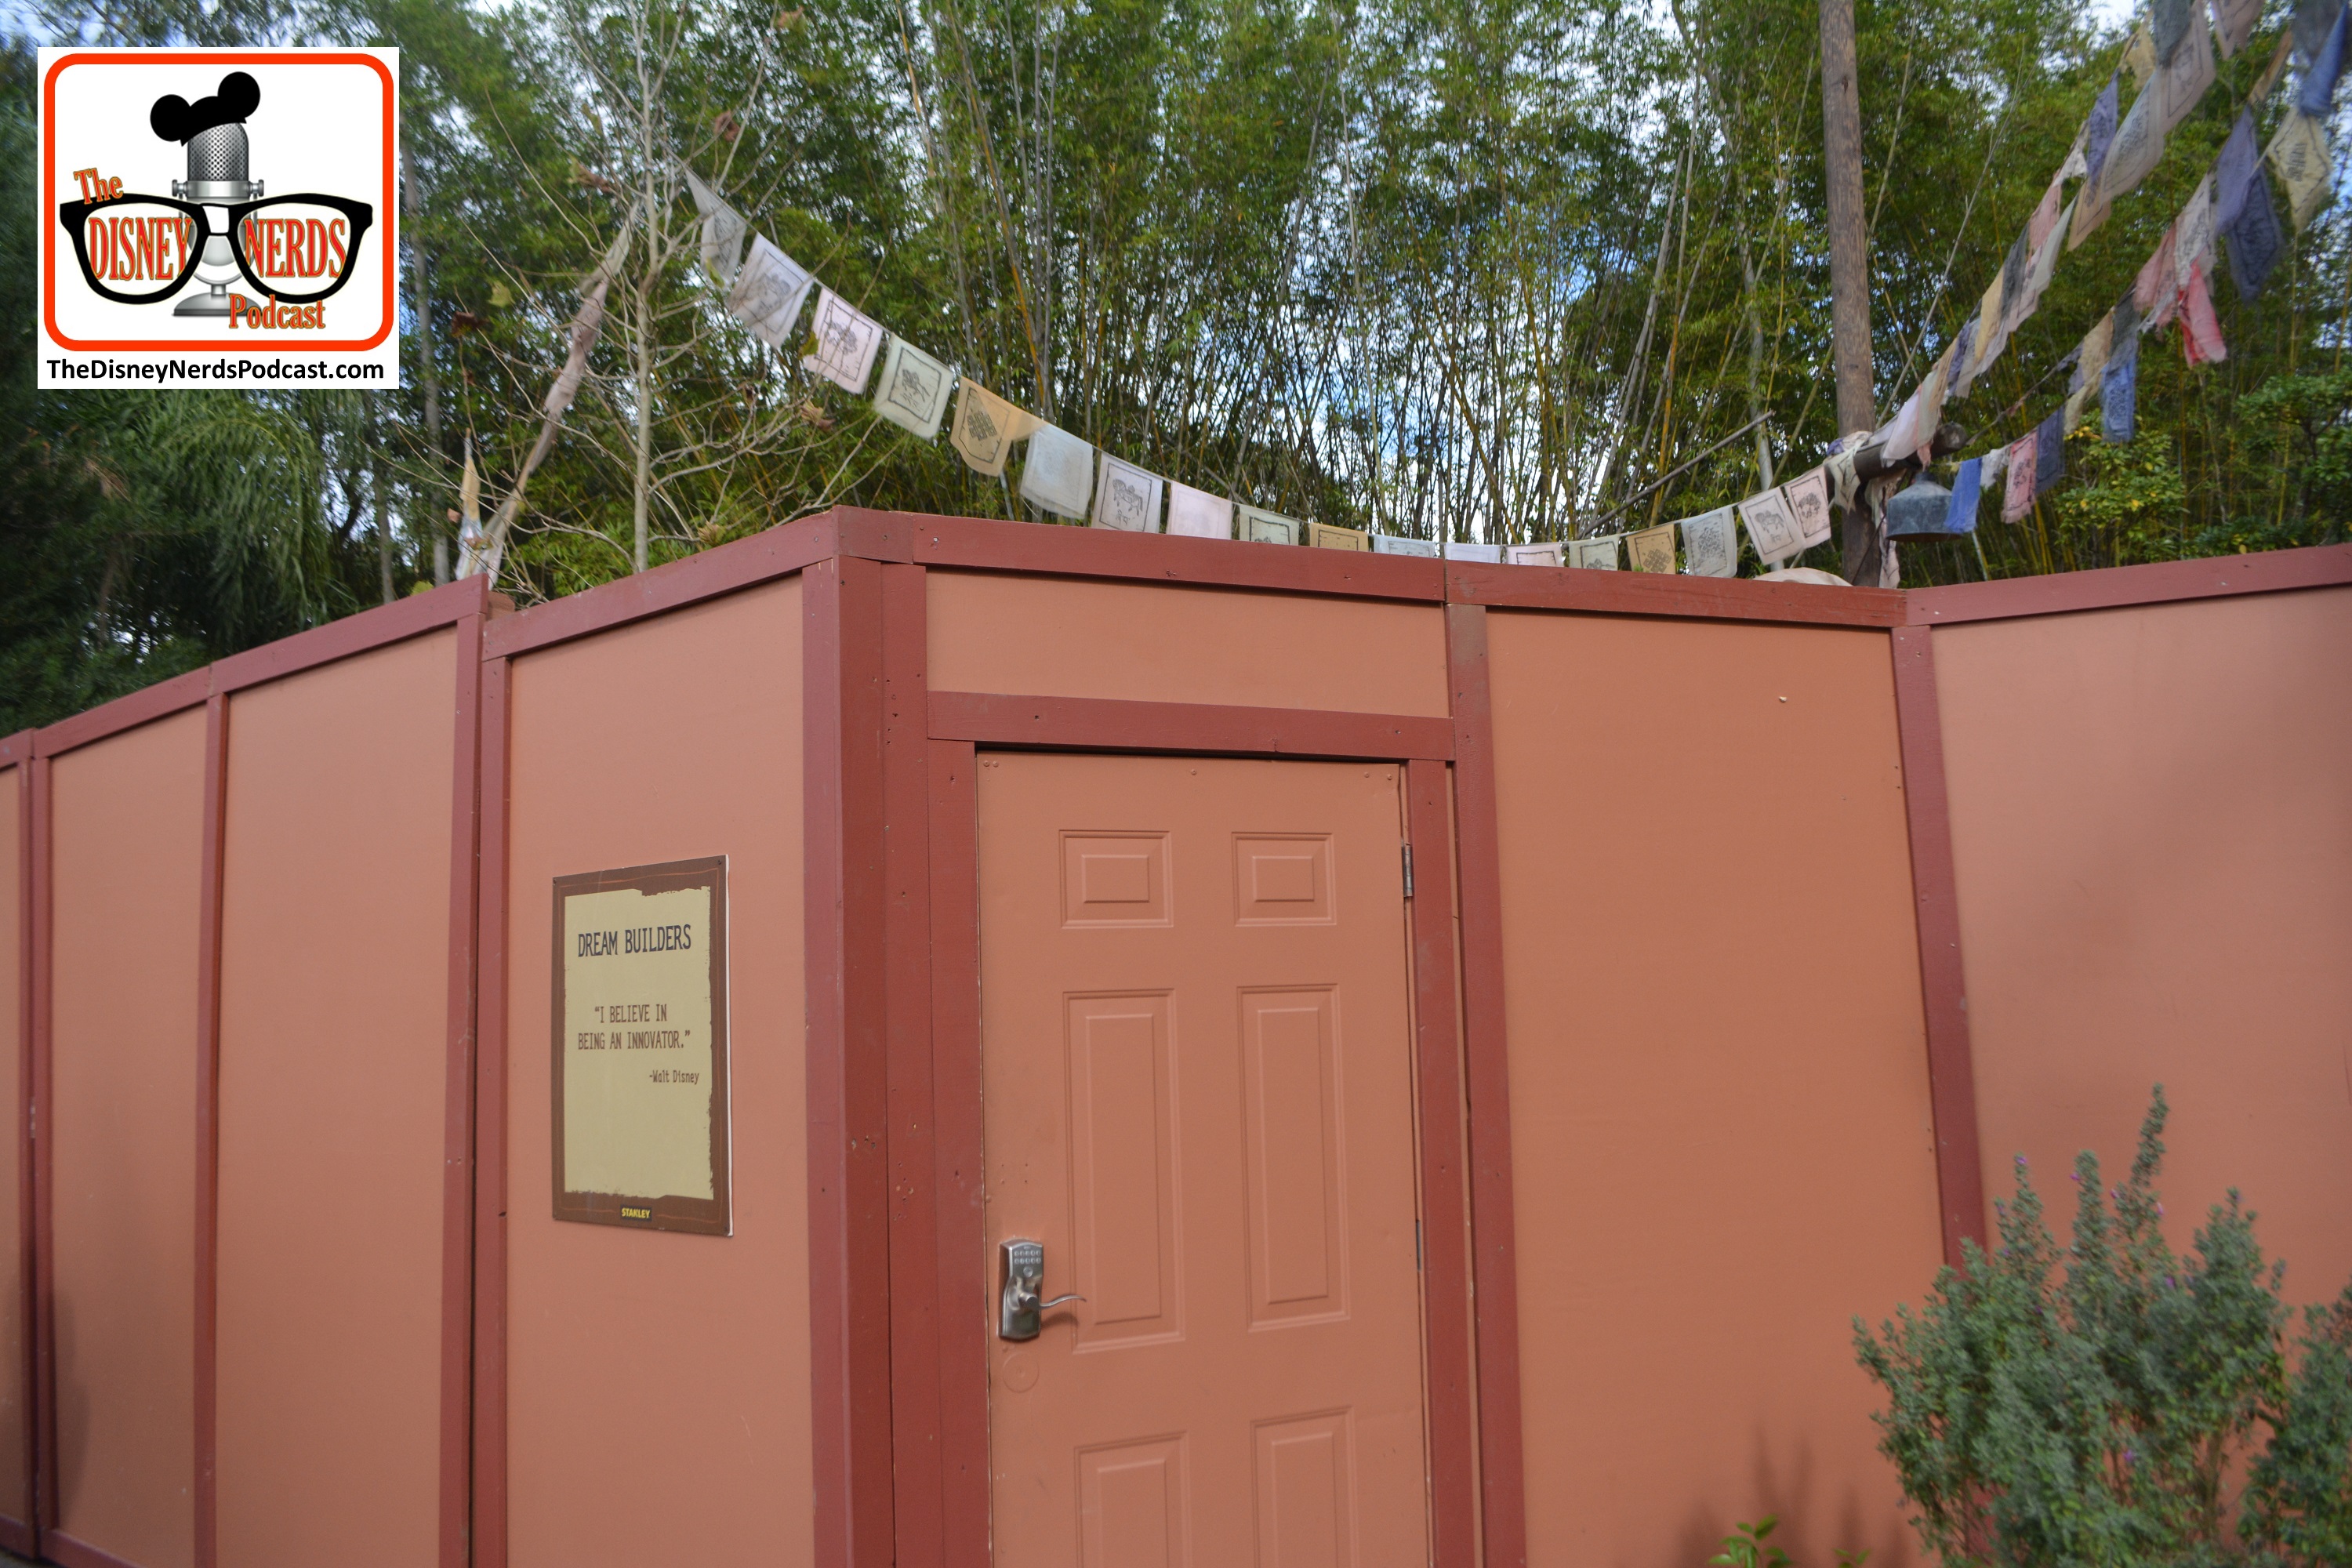 2015-12 - Animal Kingdom - Rivers of Light Construction Continues The old fast pass distribution machines for Everest.. lots of possibilities, including just widening the street, or a counter service (This area will be packed with people watching rivers of light next year)